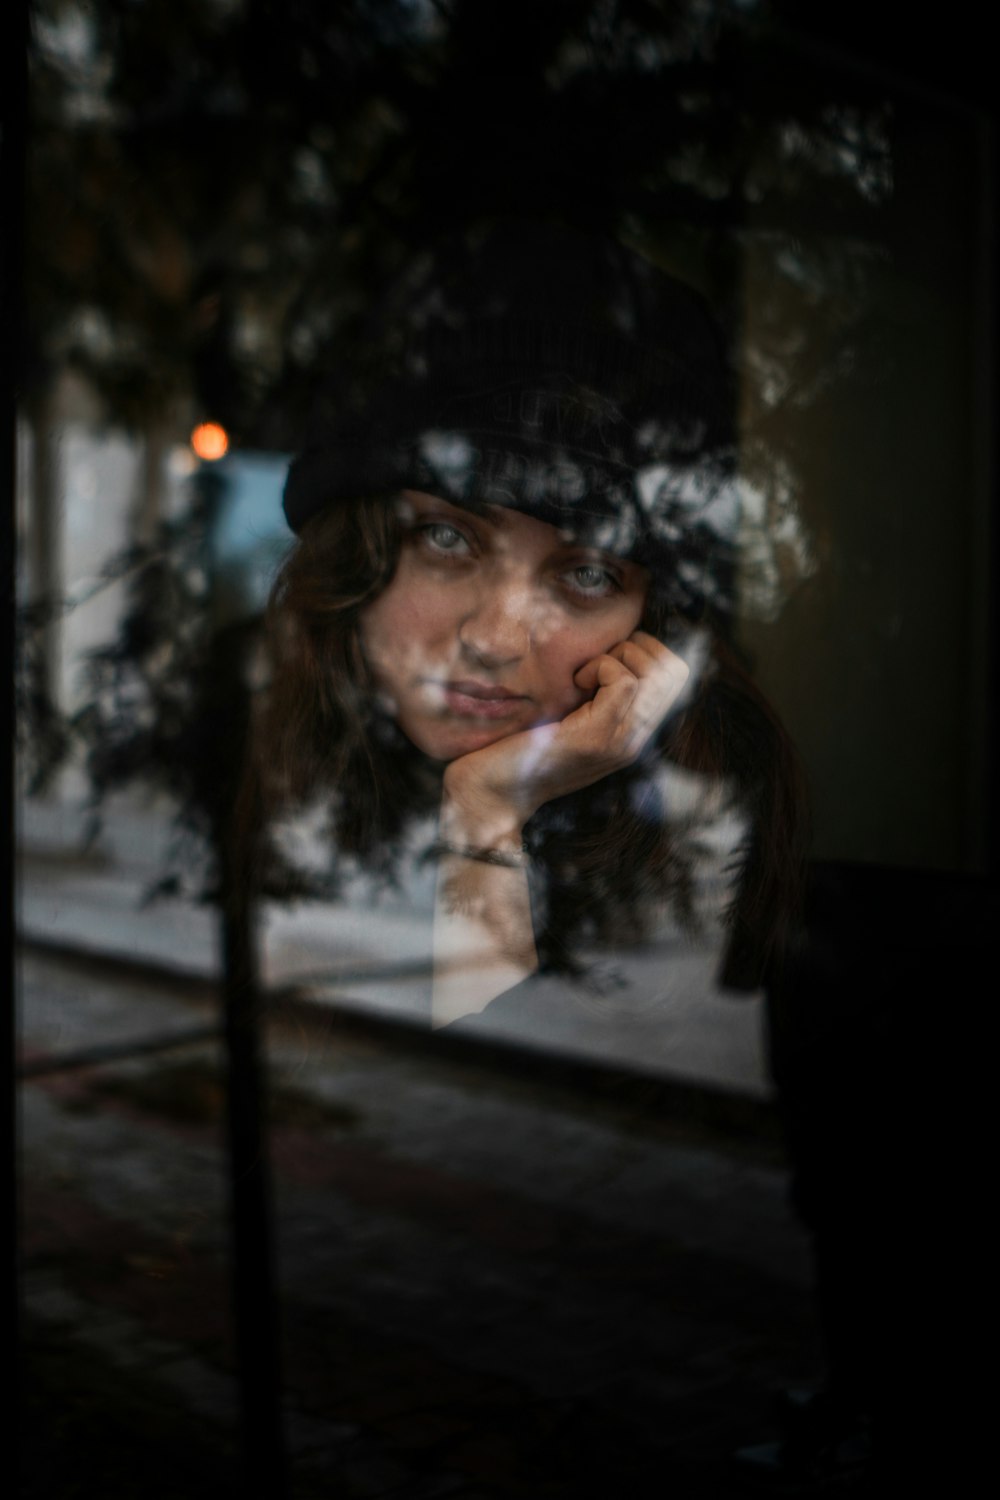 a reflection of a woman in a window